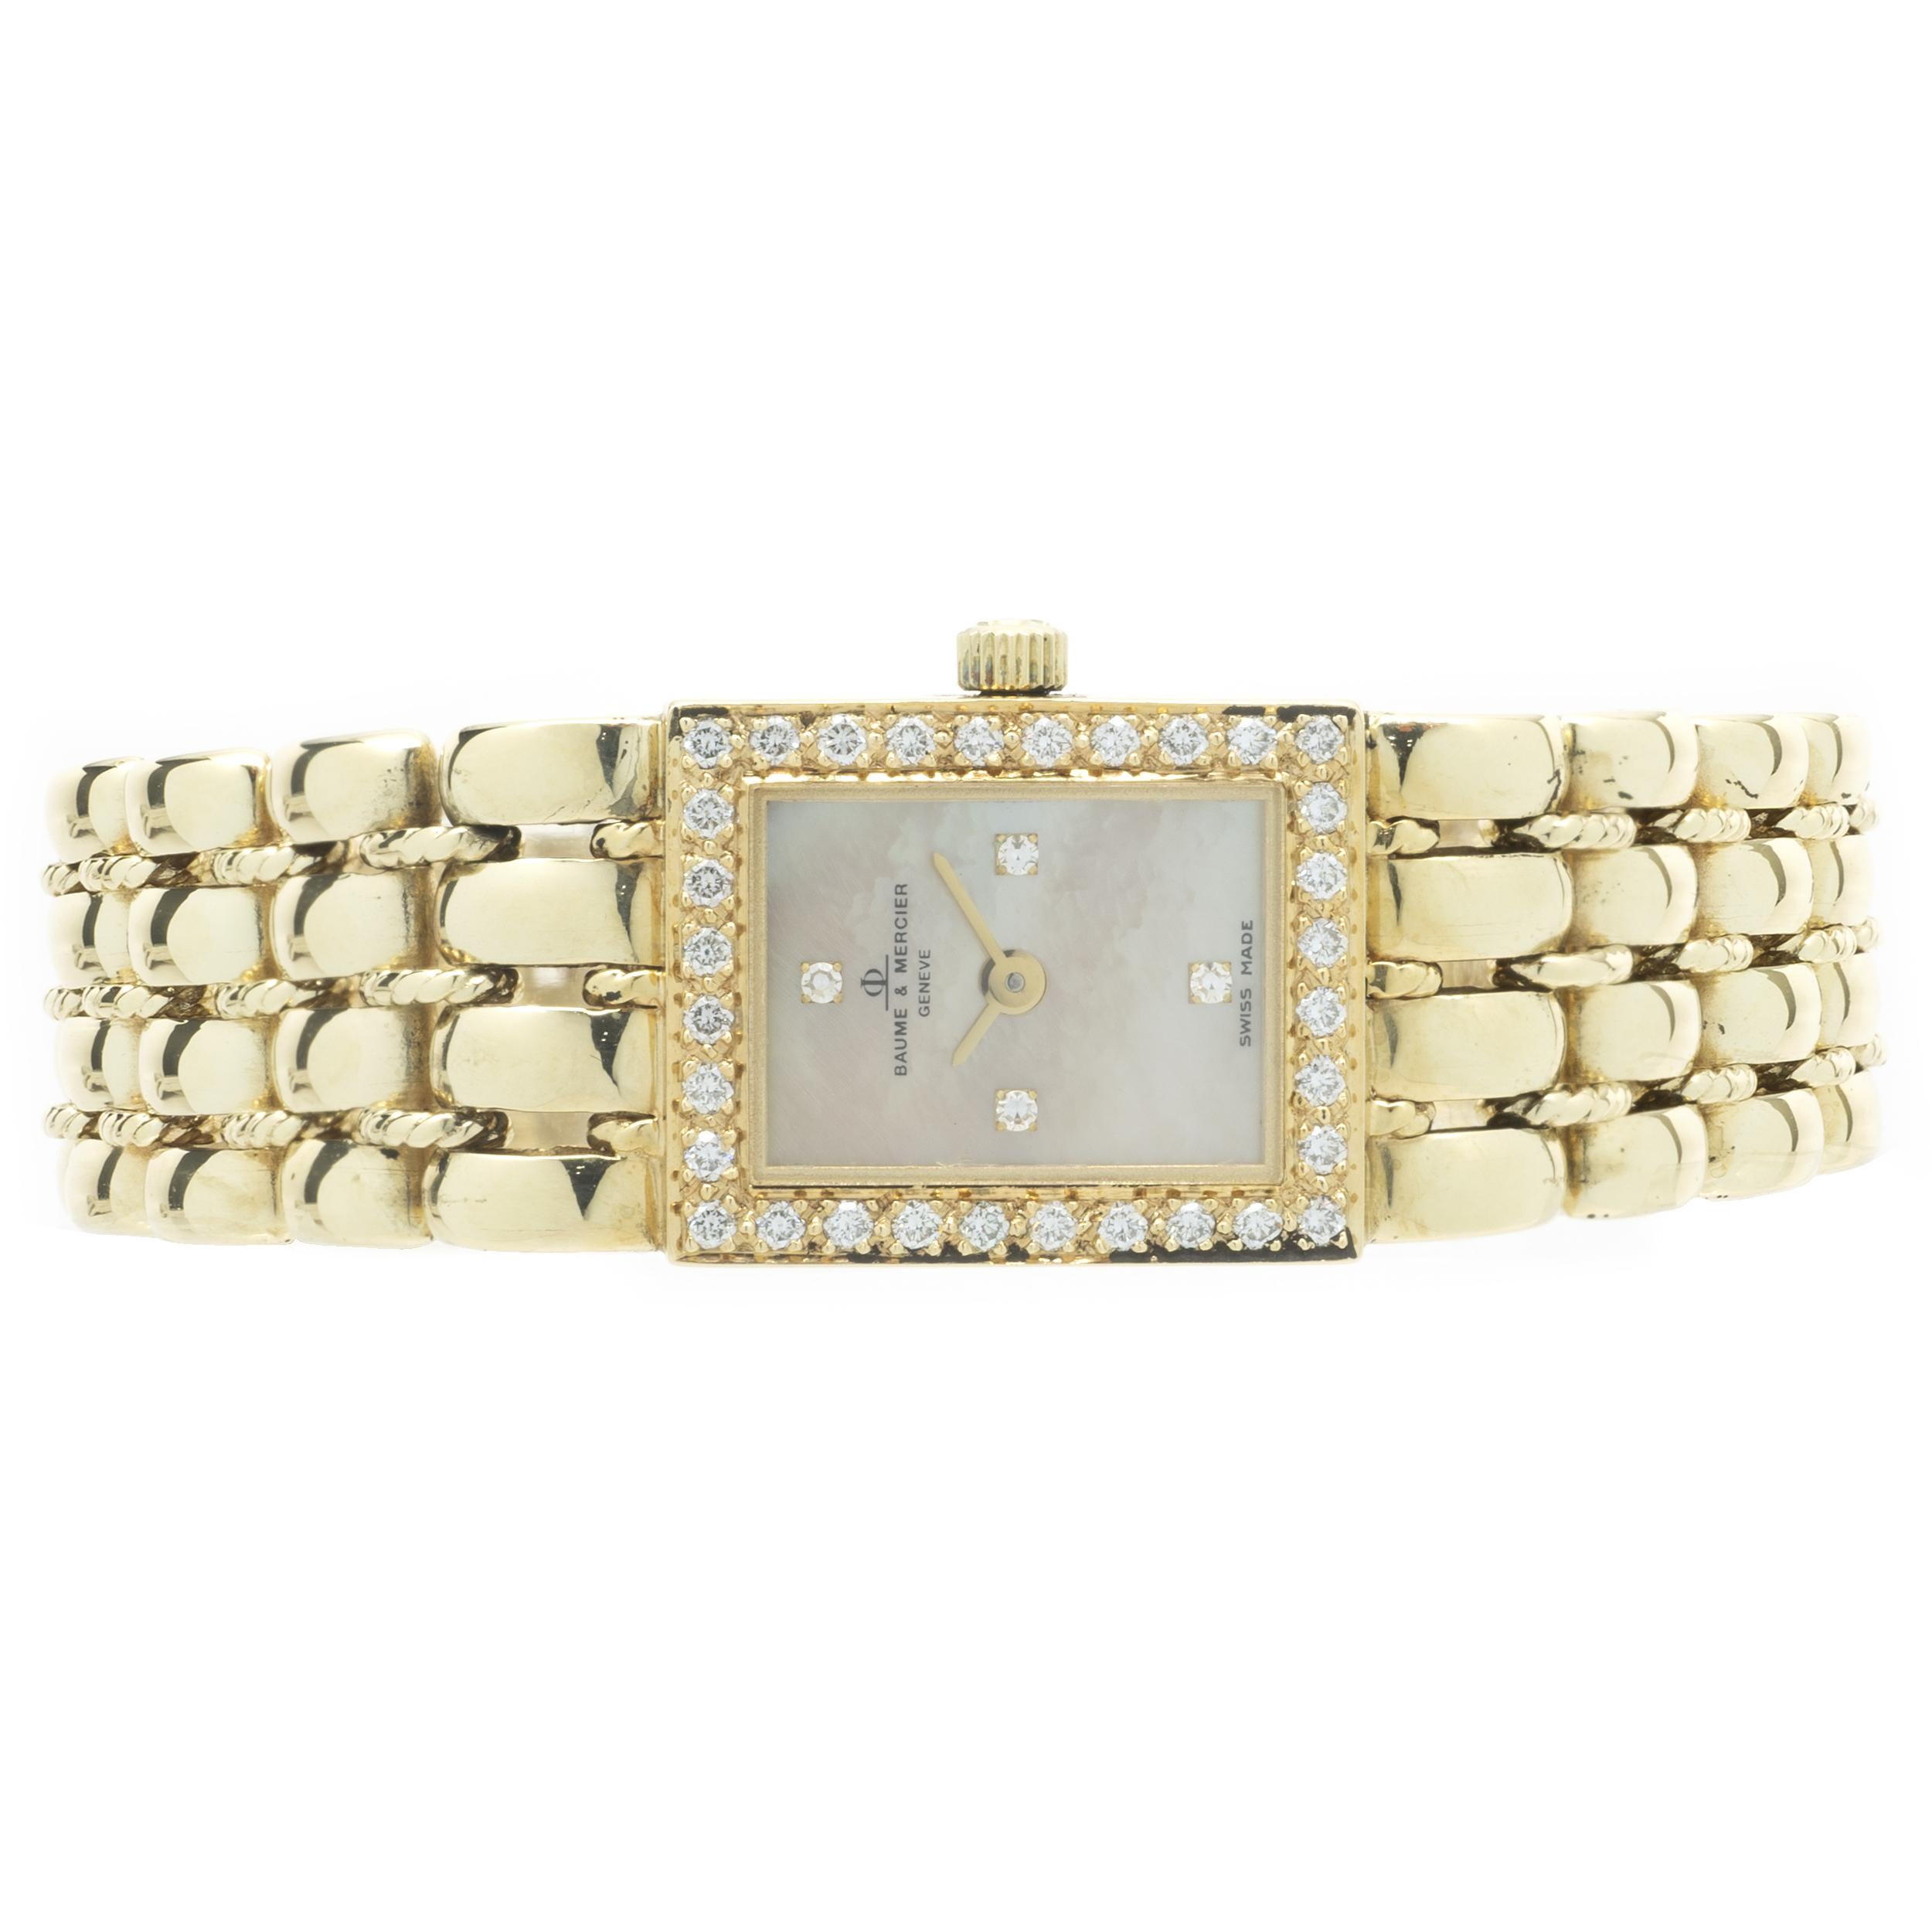 Movement: quartz
Function: hours, minutes
Case: 18.5 X 15mm 14K yellow gold rectangular case, diamond bezel
Band: 14K yellow gold panther link bracelet 
Dial: pink mother of pearl diamond dial
Serial # 7XXX
Reference # 2081774


Complete with